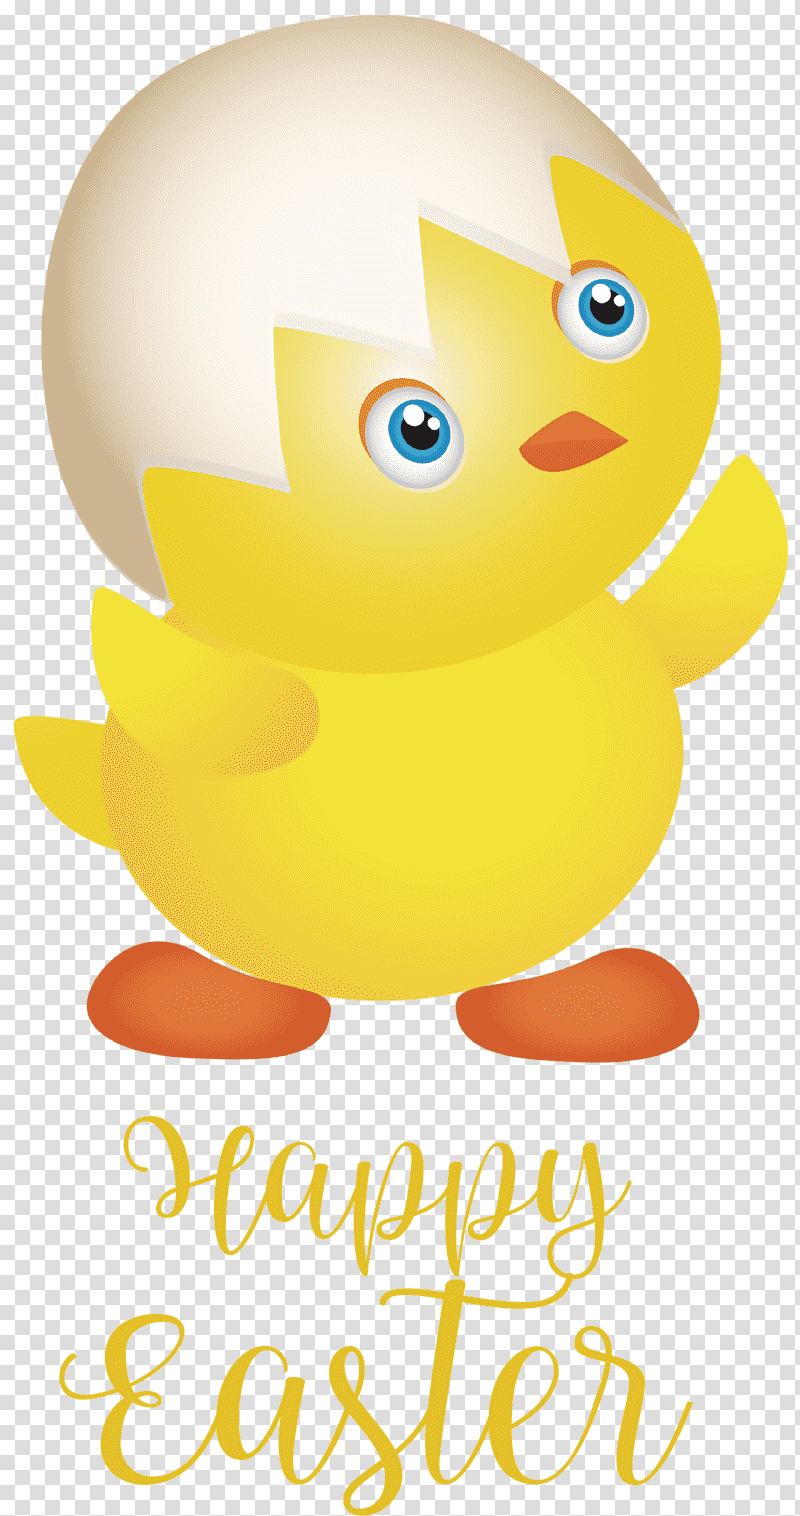 Happy Easter chicken and ducklings, Smiley, Emoticon, Birds, Cartoon, Yellow, Happiness transparent background PNG clipart